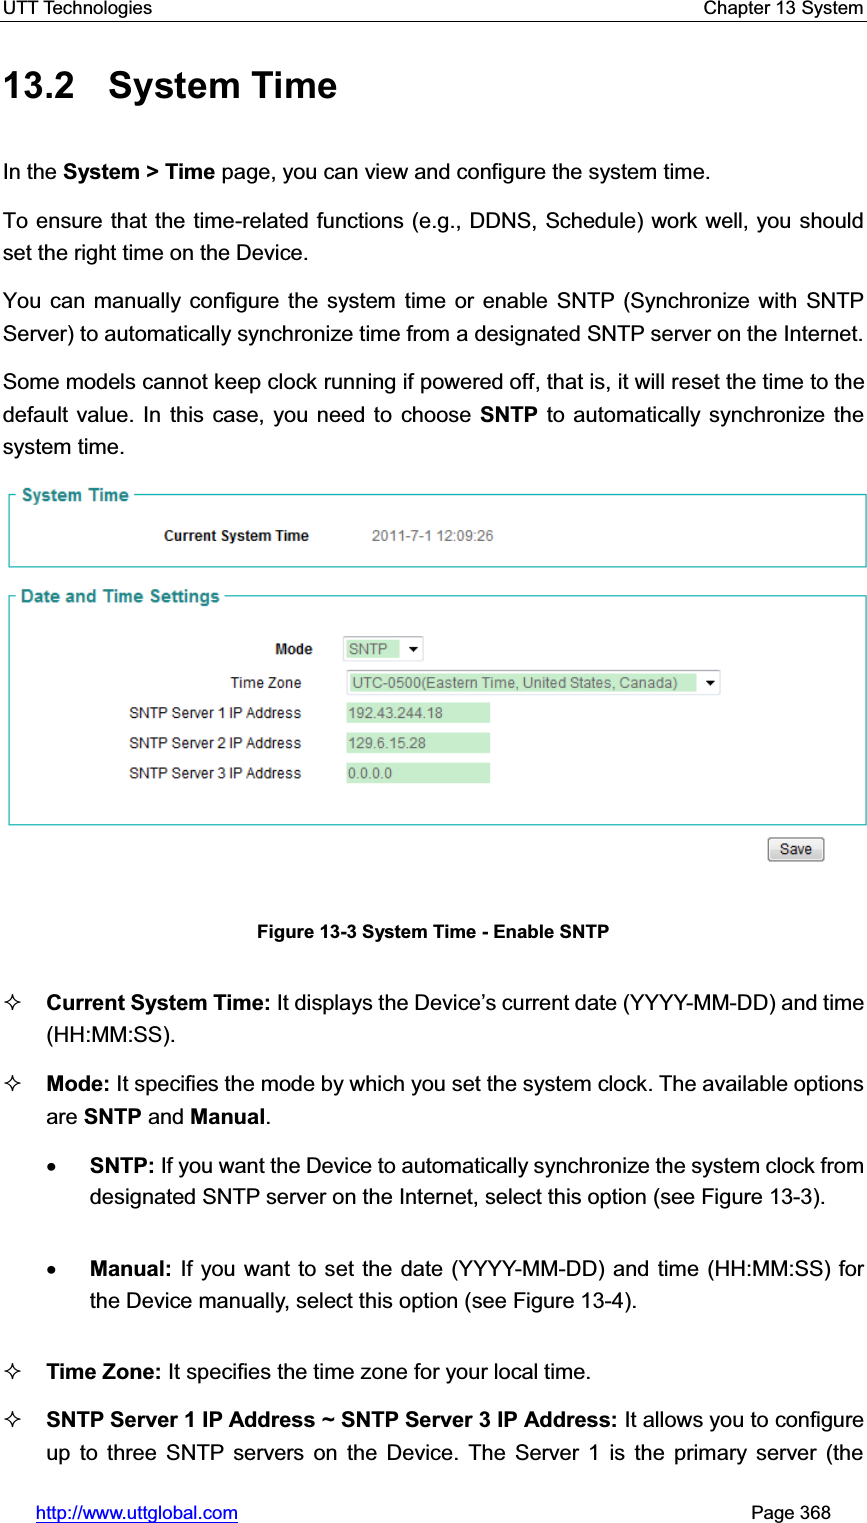 UTT Technologies    Chapter 13 System   http://www.uttglobal.com                                                       Page 368 13.2 System Time In the System &gt; Time page, you can view and configure the system time.To ensure that the time-related functions (e.g., DDNS, Schedule) work well, you should set the right time on the Device.You can manually configure the system time or enable SNTP (Synchronize with SNTP Server) to automatically synchronize time from a designated SNTP server on the Internet.Some models cannot keep clock running if powered off, that is, it will reset the time to the default value. In this case, you need to choose SNTP to automatically synchronize the system time.Figure 13-3 System Time - Enable SNTP Current System Time: It displays the Device¶s current date (YYYY-MM-DD) and time (HH:MM:SS). Mode: It specifies the mode by which you set the system clock. The available options are SNTP and Manual.xSNTP: If you want the Device to automatically synchronize the system clock from designated SNTP server on the Internet, select this option (see Figure 13-3). xManual: If you want to set the date (YYYY-MM-DD) and time (HH:MM:SS) for the Device manually, select this option (see Figure 13-4). Time Zone: It specifies the time zone for your local time. SNTP Server 1 IP Address ~ SNTP Server 3 IP Address: It allows you to configure up to three SNTP servers on the Device. The Server 1 is the primary server (the 